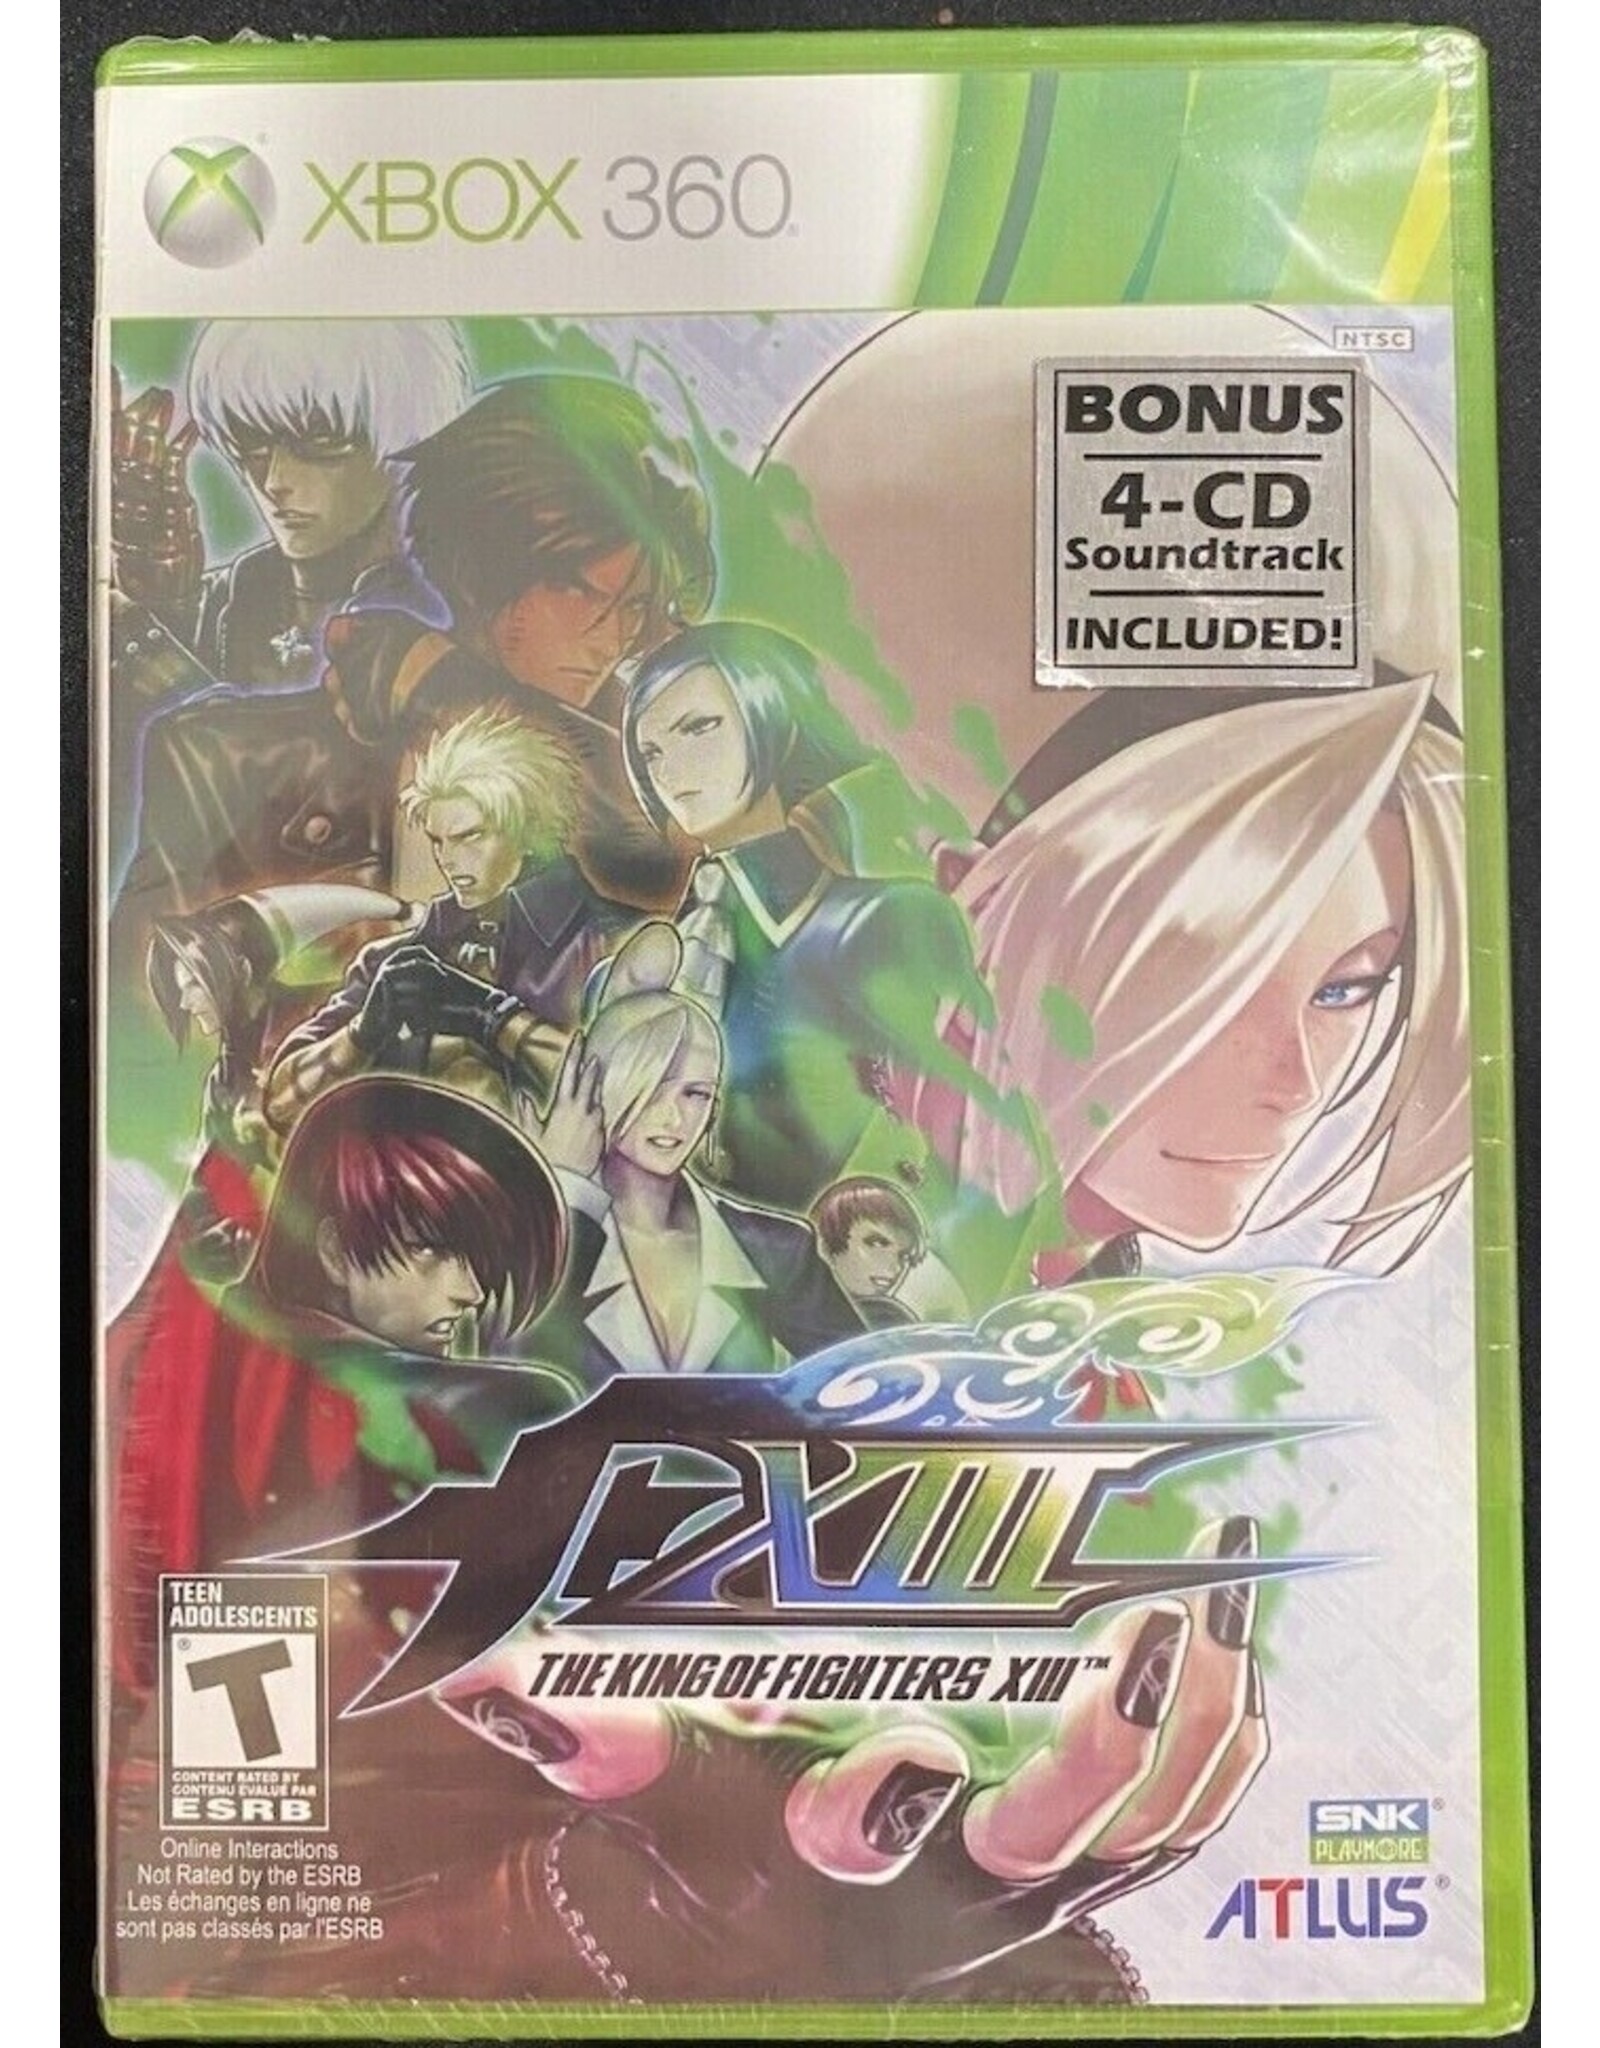 Xbox 360 King of Fighters XIII (Brand New with Bonus Soundtrack)